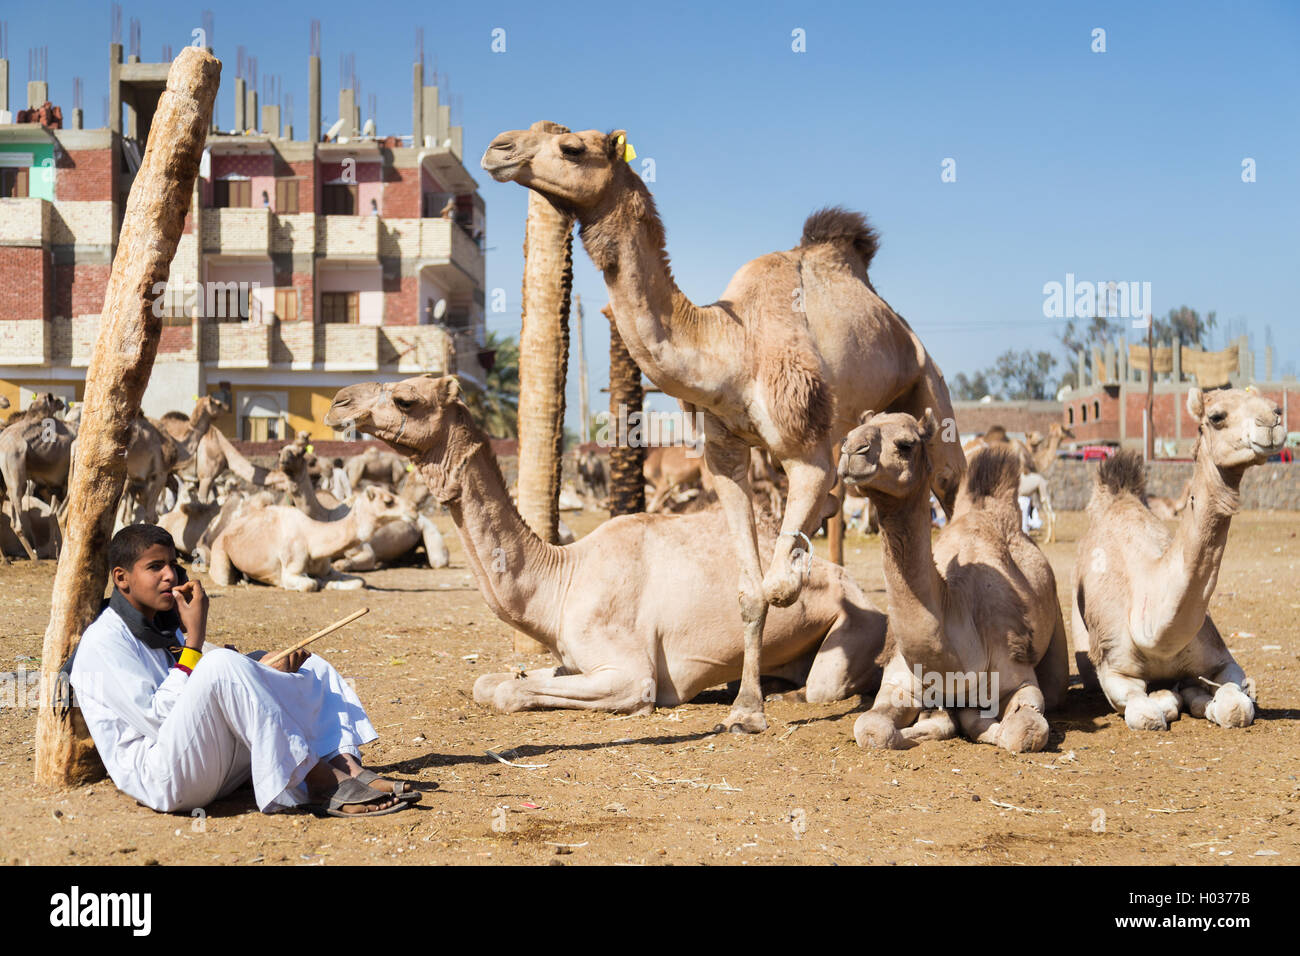 DARAW, EGYPT - FEBRUARY 6, 2016: Young local camel salesman sitting next to camels at Camel market. Stock Photo